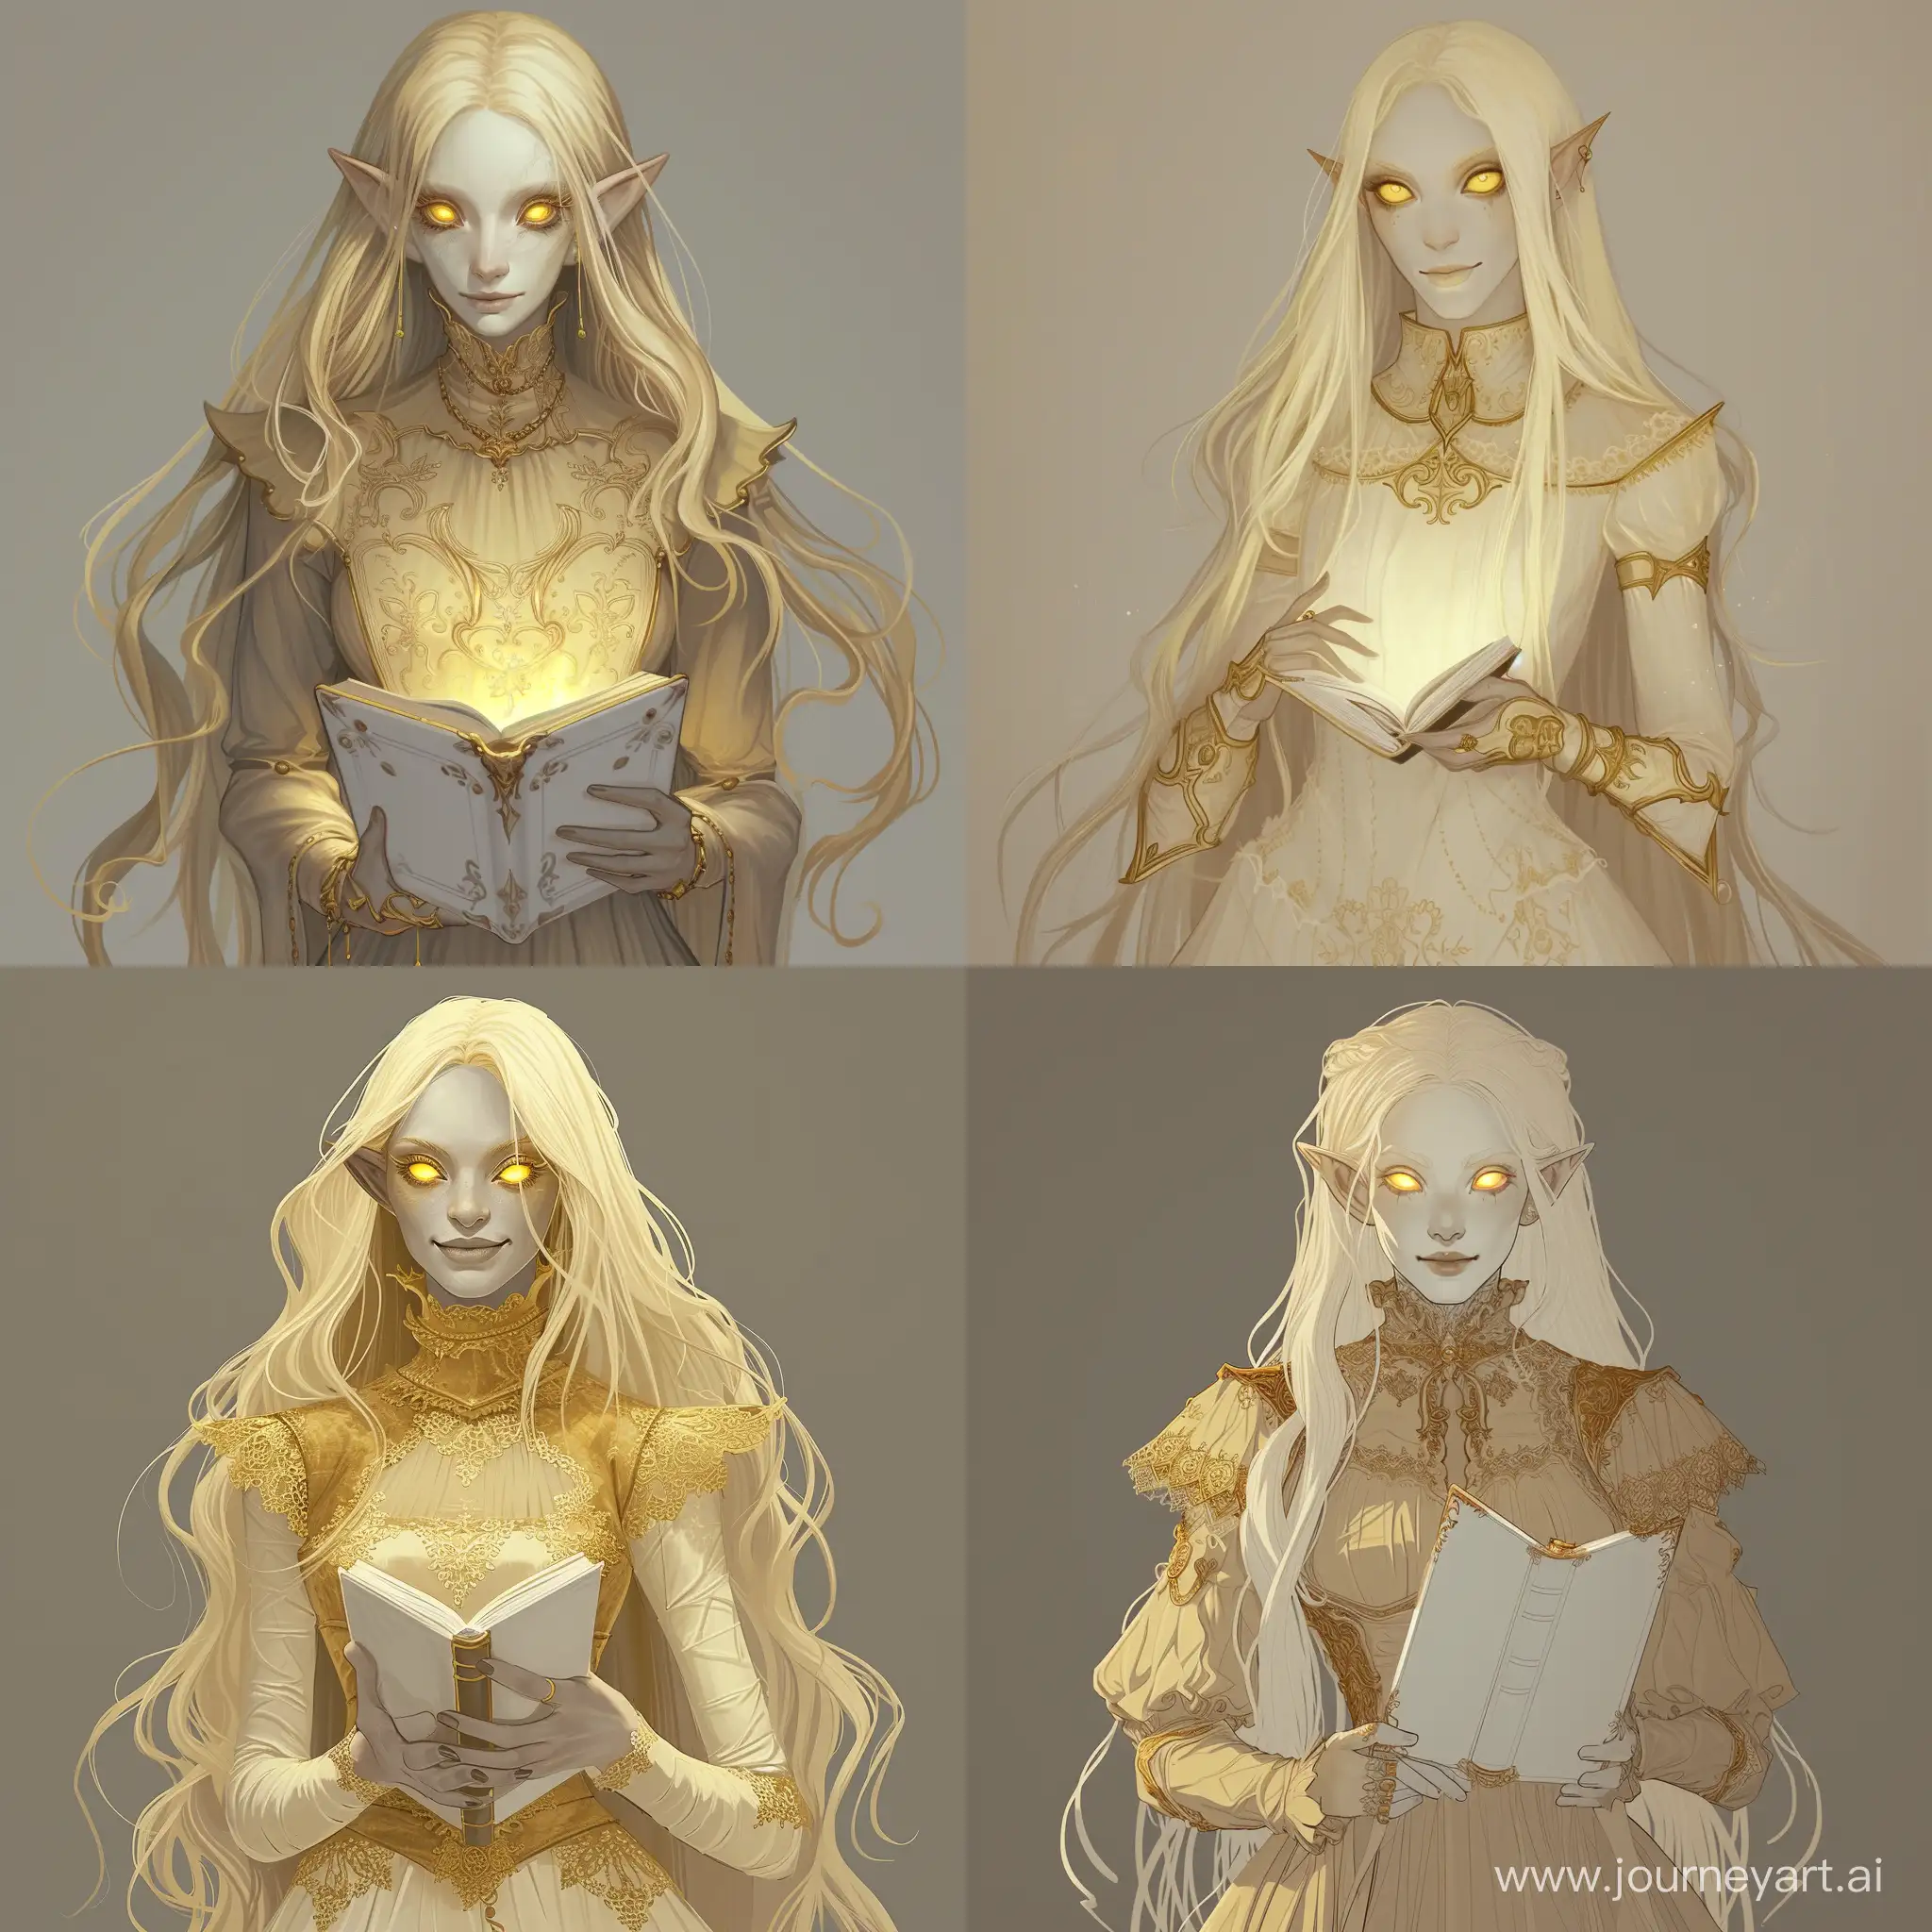 Draw a character from the Dungeons and Dragons universe according to the following description: She is a high elf witch with long pale-gold hair and glowing yellow eyes. She has light beige skin, a soft smile on her face and a white book with golden trim in her hands. The witch is dressed in a a formal dress with a high collar and sleeves. The dress is sparingly decorated with gold lace.